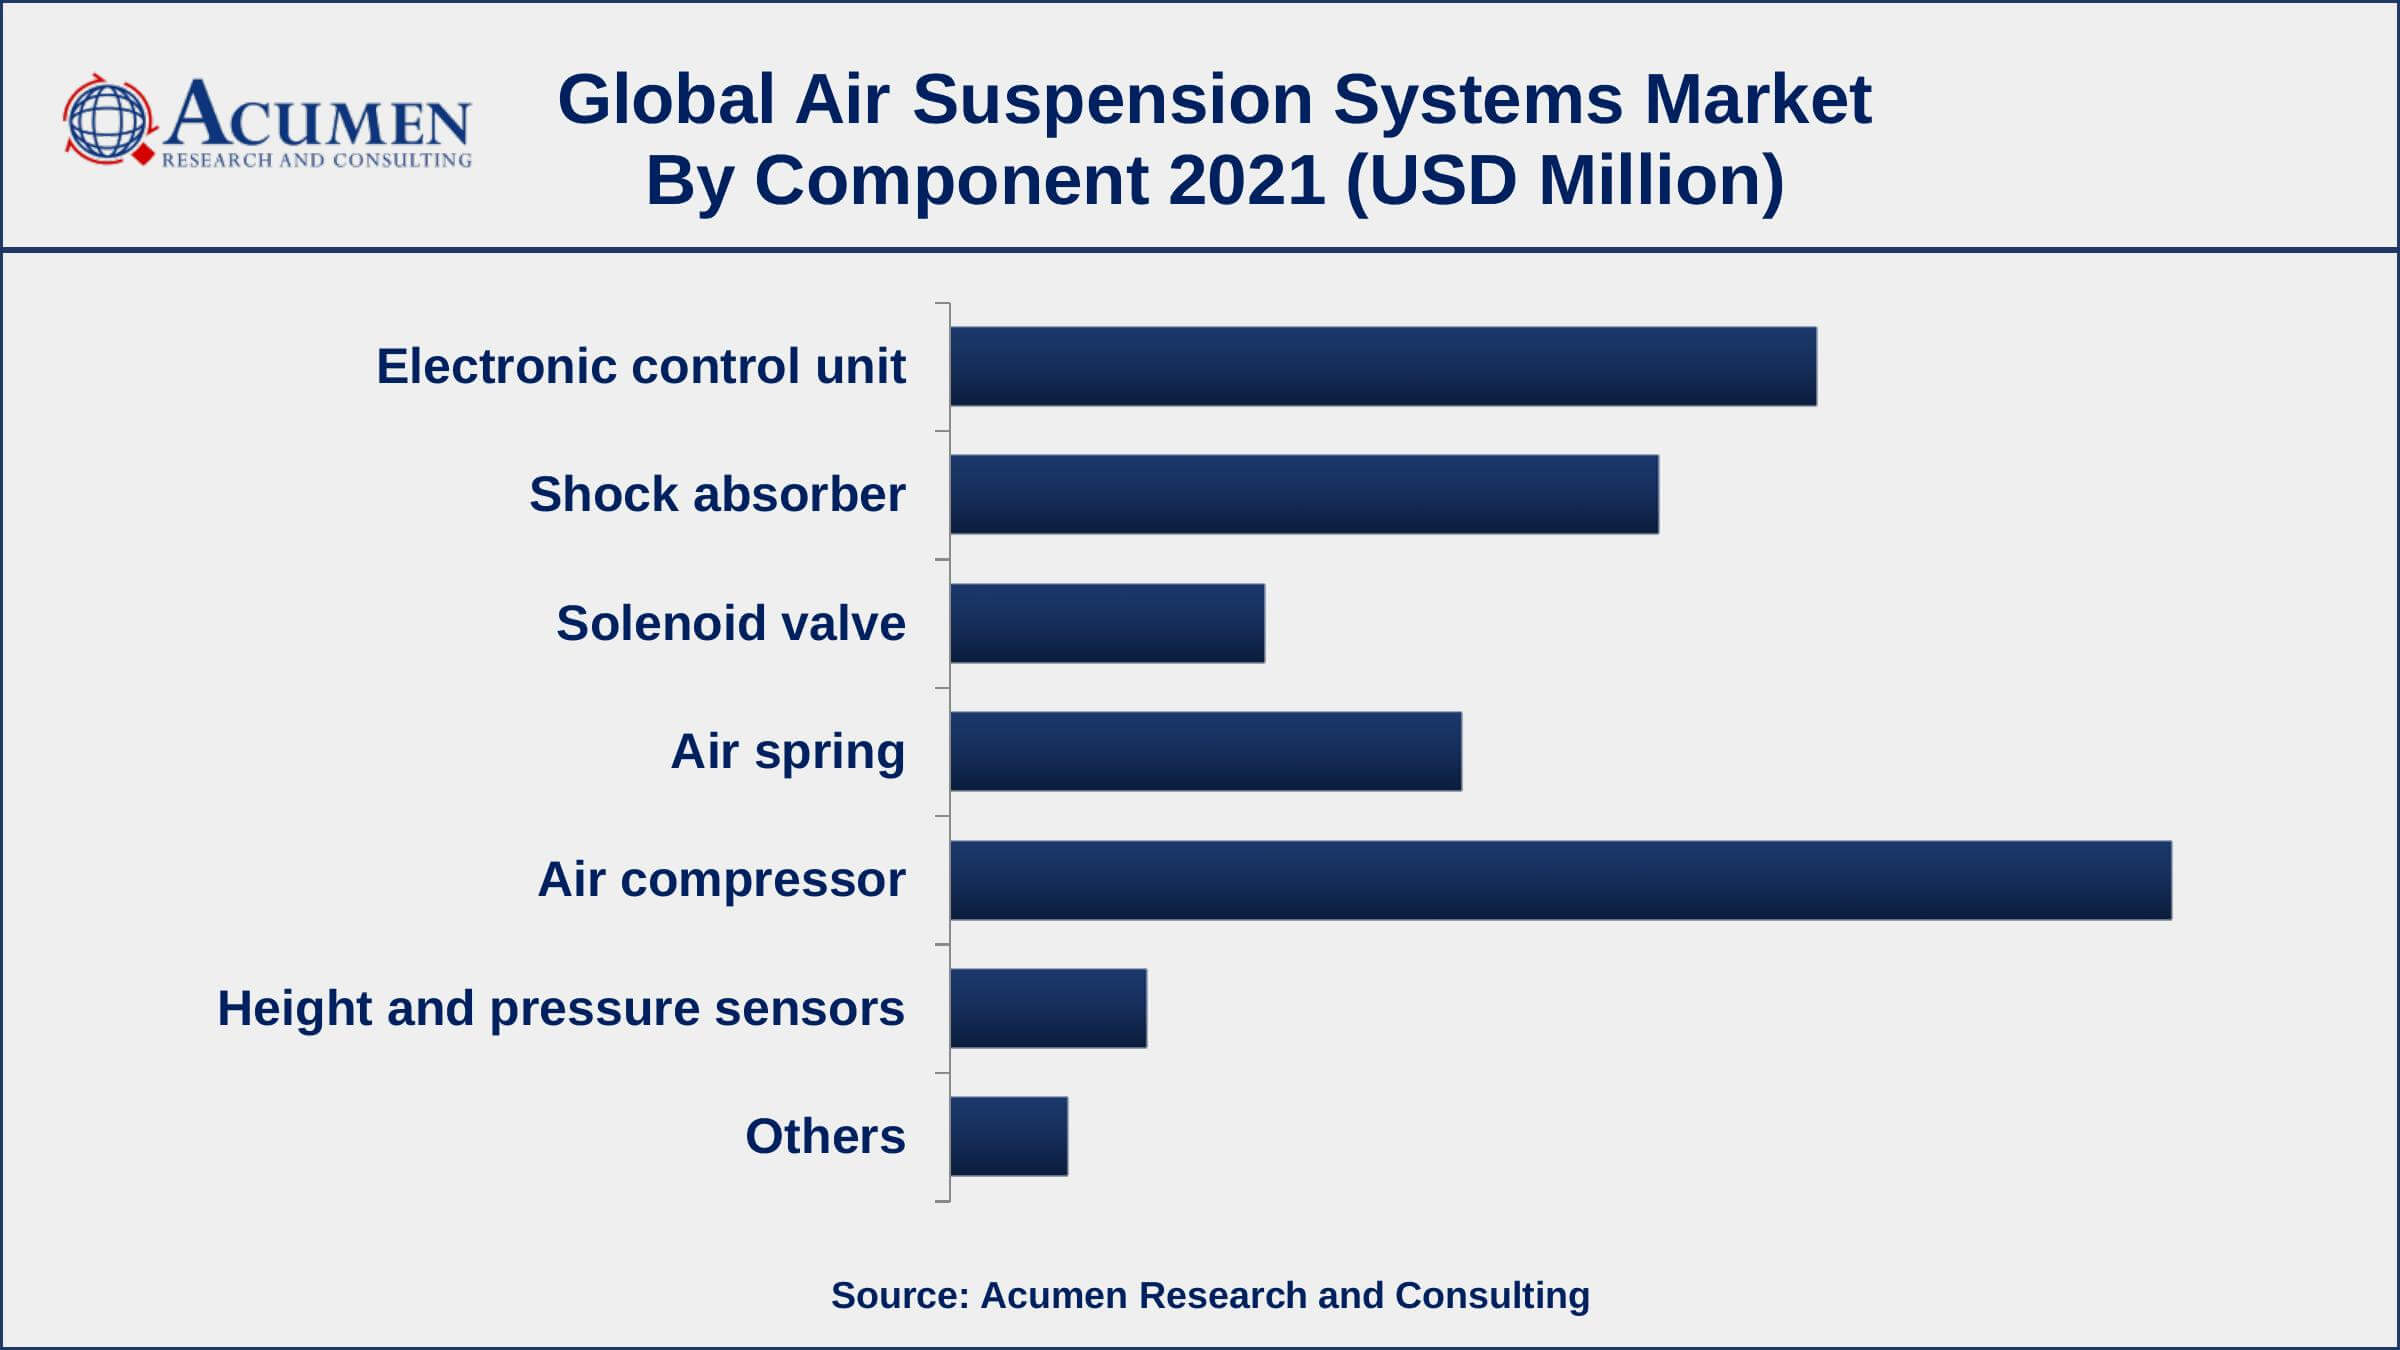 By component, the air compressor segment has accounted market share of over 31% in 2021